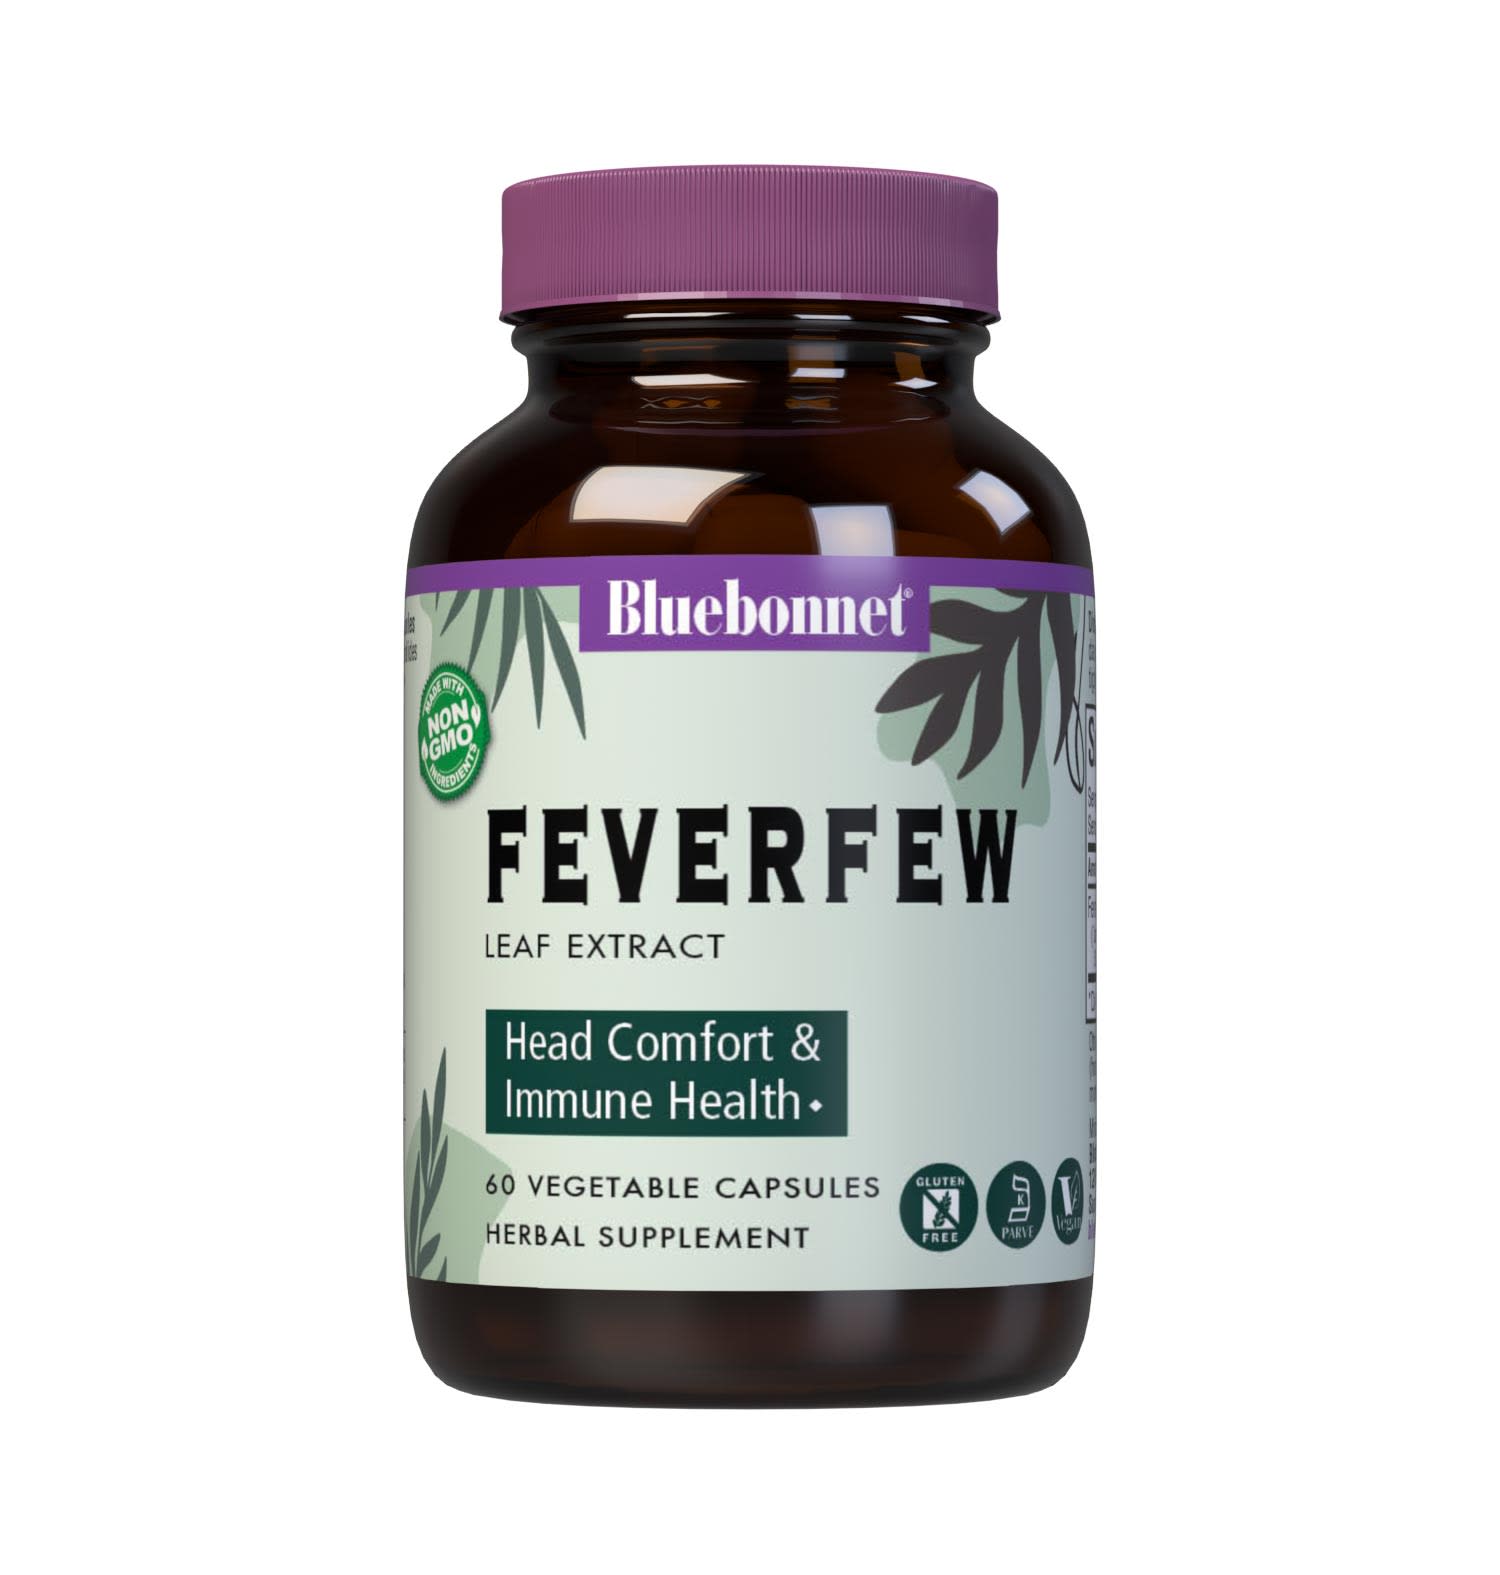 Bluebonnet’s Feverfew Leaf Extract 60 Vegetable Capsules provide a standardized extract of parthenolides, the most researched active constituents found in feverfew. A clean and gentle water-based extraction method is employed to capture and preserve feverfew’s most valuable components. #size_60 count